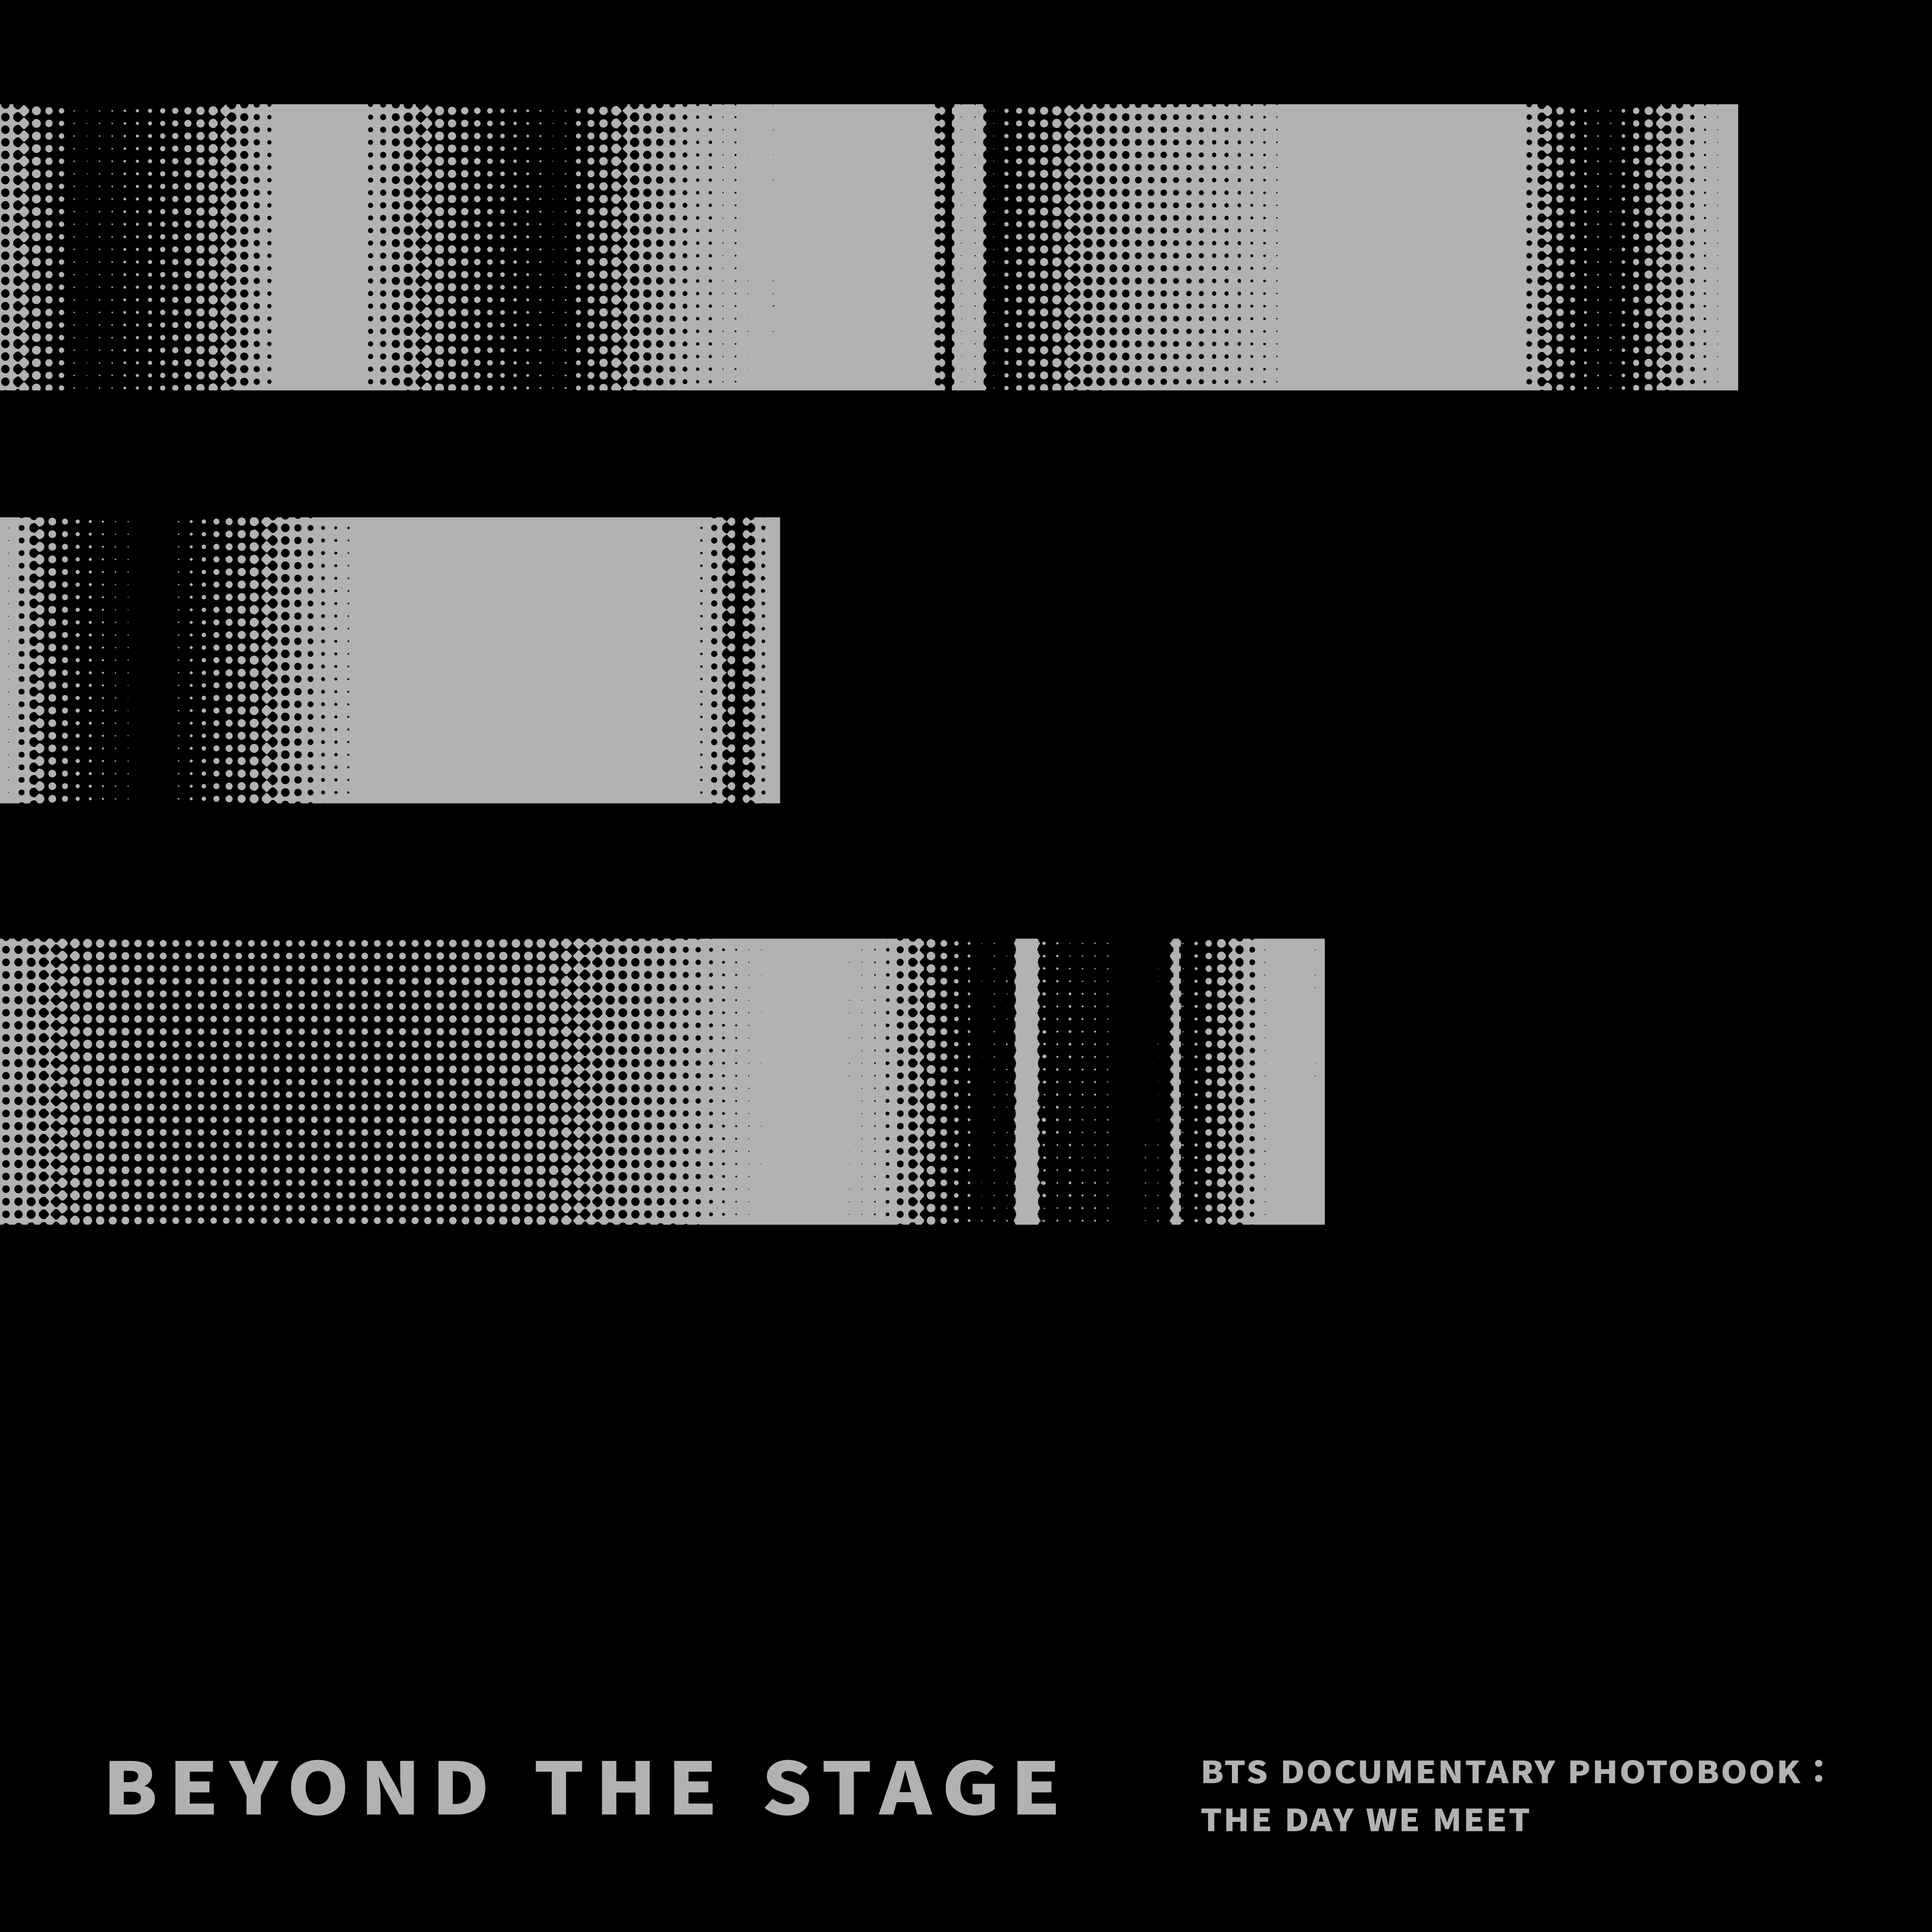 BEYOND THE STAGE' BTS DOCUMENTARY PHOTOBOOK : THE DAY WE MEET Poster